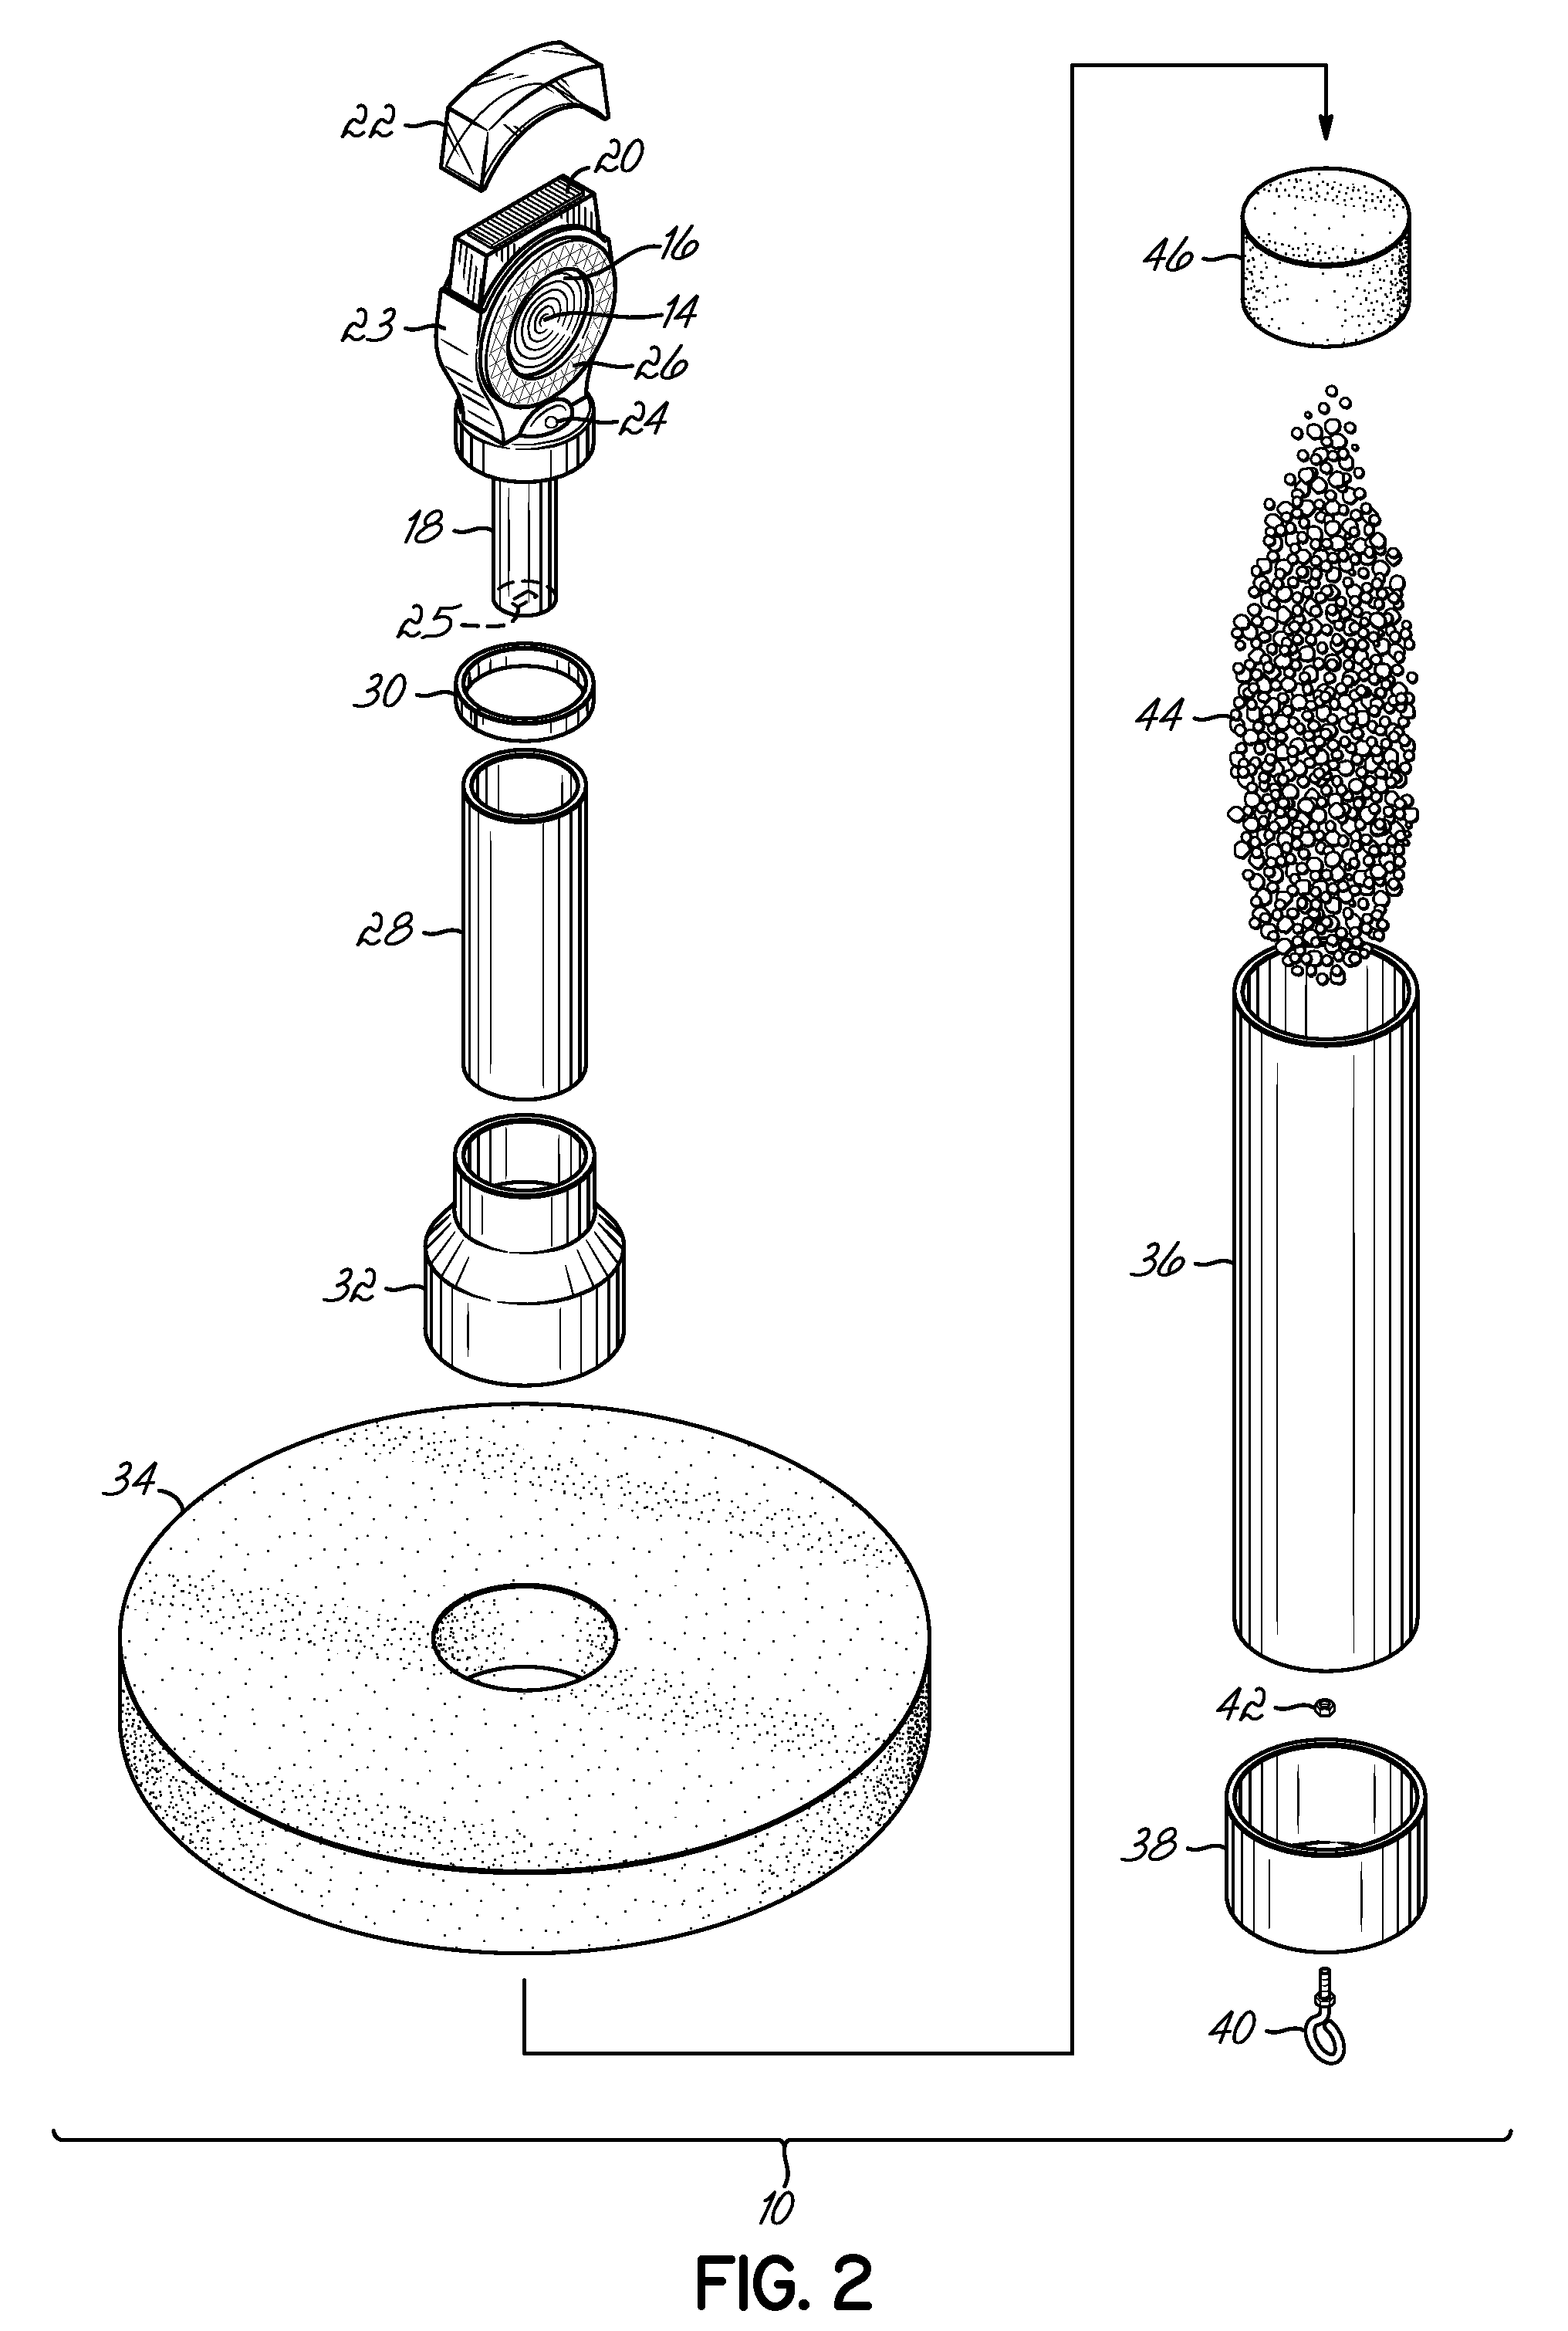 Method and apparatus for repelling geese